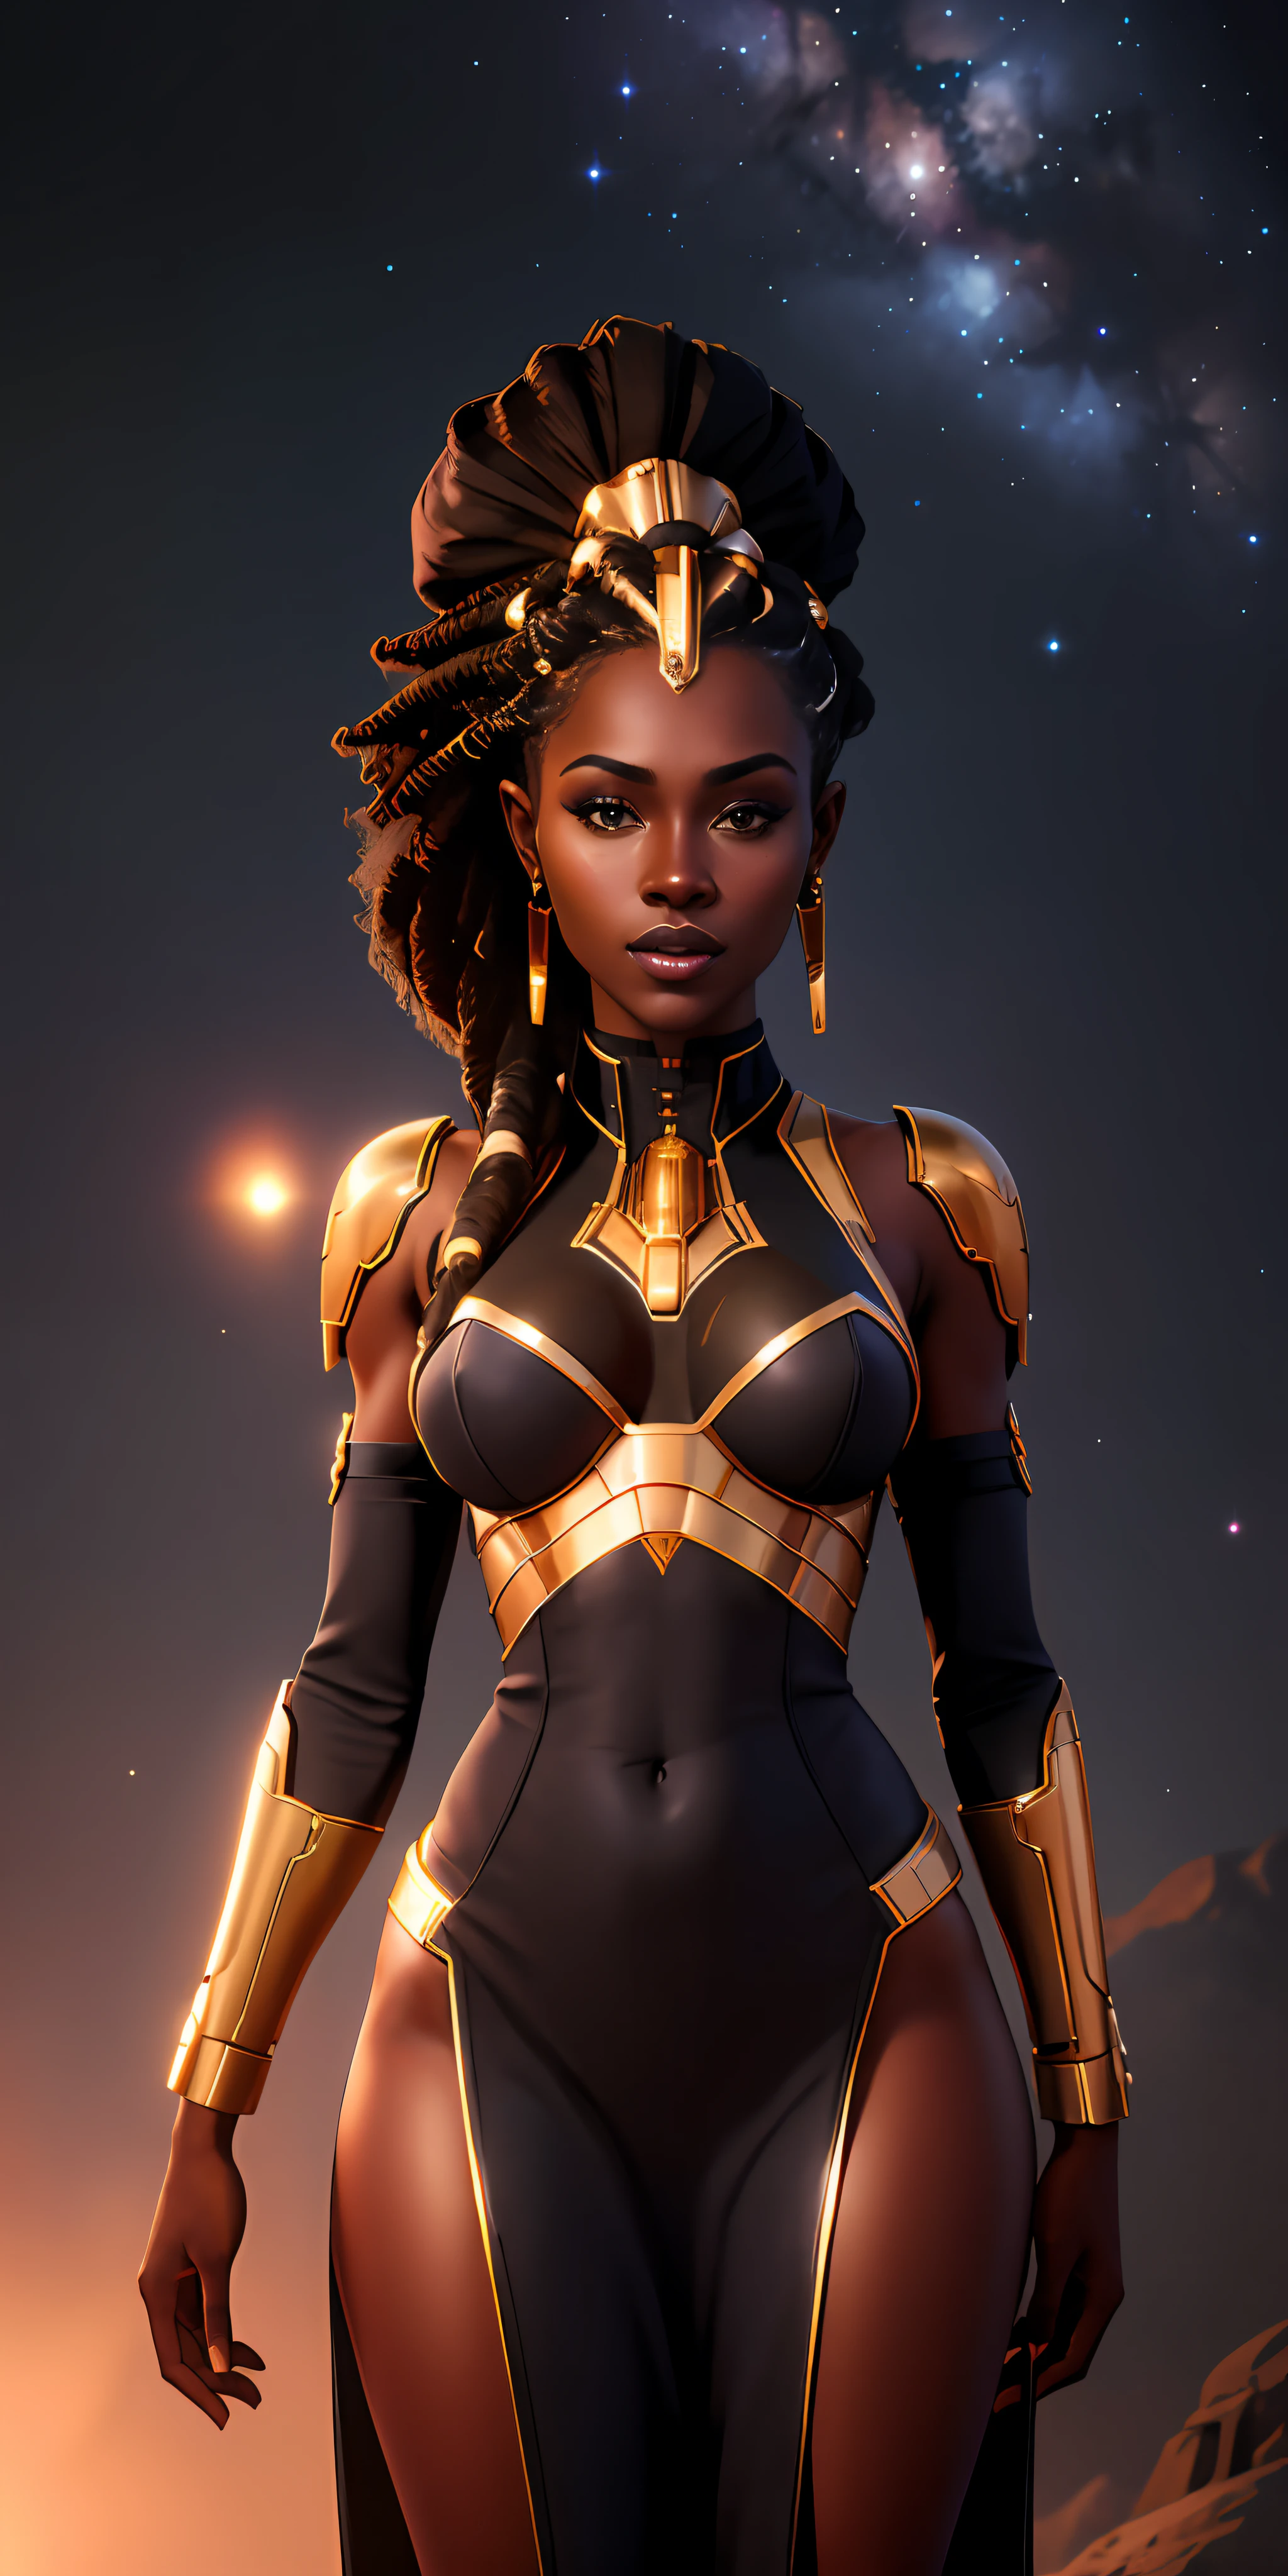 ((realistic image of a beautiful African-American woman, dark skin color)), beautiful smile, ((looking at the night sky, standing natural pose, in front of the Millennium Falcon)), wearing mandallor armor, long mega hair hair, dreadlocks, ((kanekalon)), camera view against plongée, golden ratio, dark background lighting, close-up, detailed facial details, perfect face, sharpness, trend art,  Sharp facial details, ultra high quality, line art, high fantasy, exquisite, 4k, soft lighting 8k, dreamy --iso 100